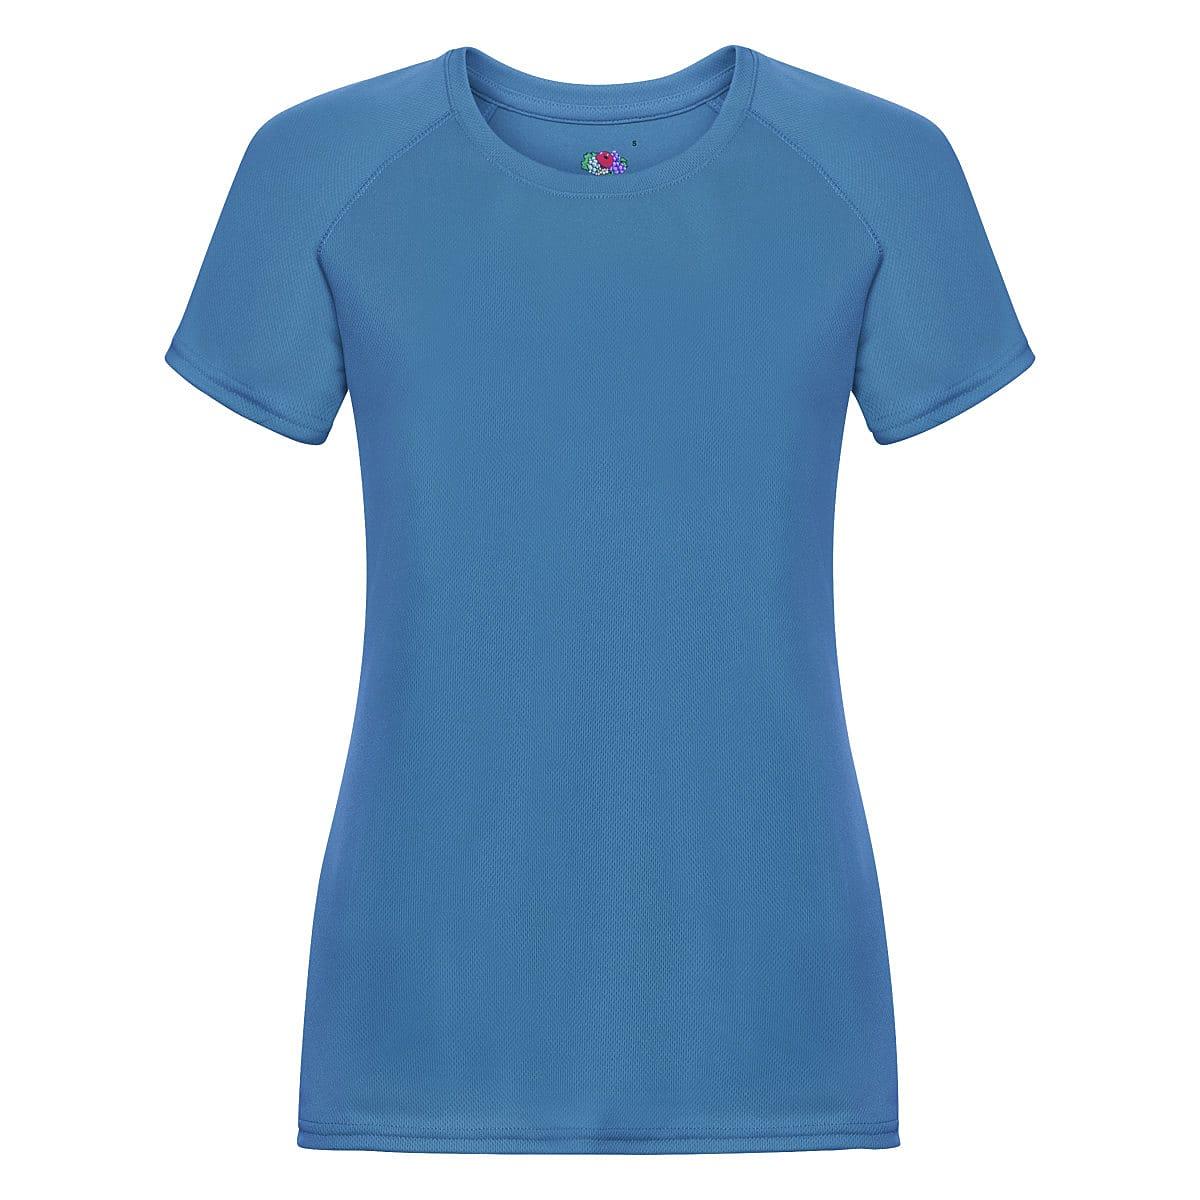 Fruit Of The Loom Womens Performance T-Shirt in Azure Blue (Product Code: 61392)